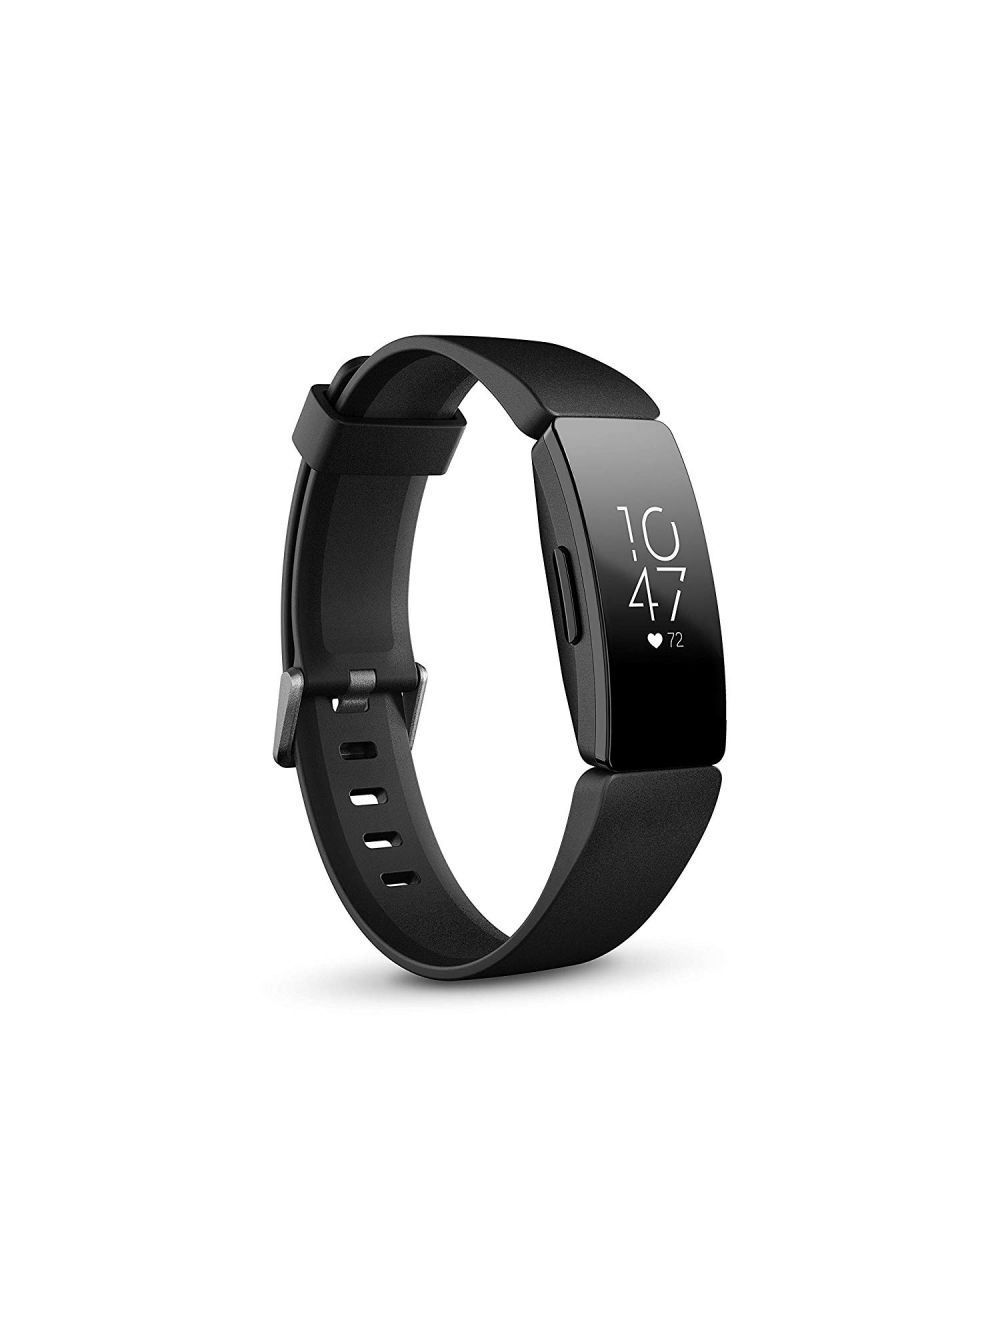 new fitbit inspire hr